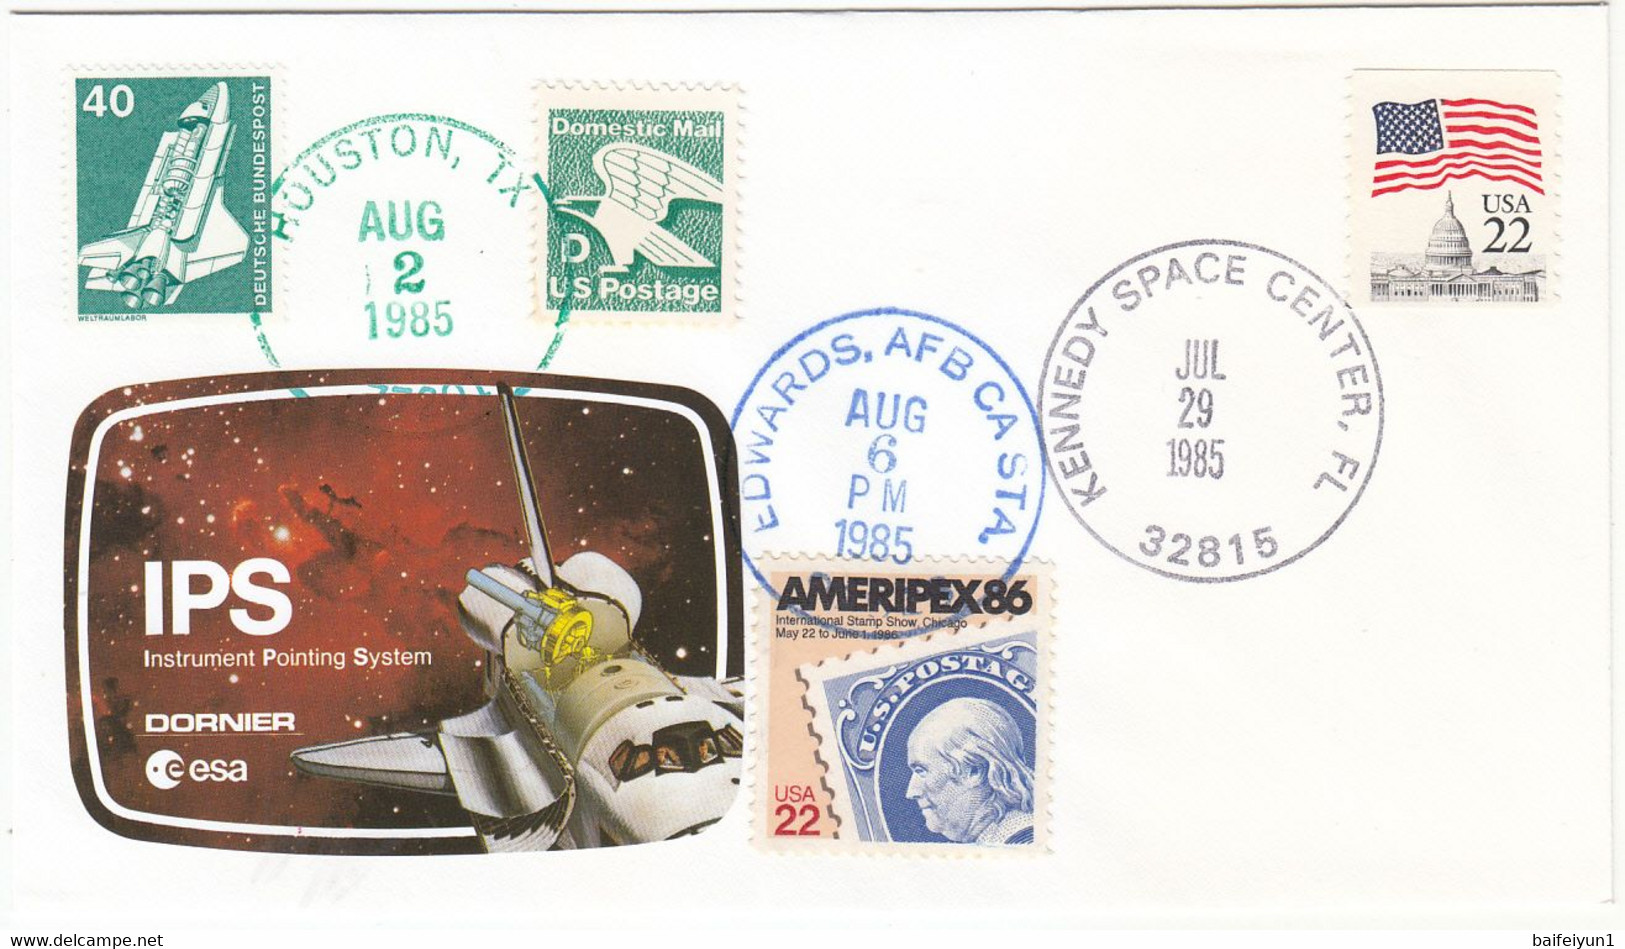 1985 USA  Space Shuttle Challenger STS-51F Mission And Instrument Pointing System Commemorative Cover - North  America